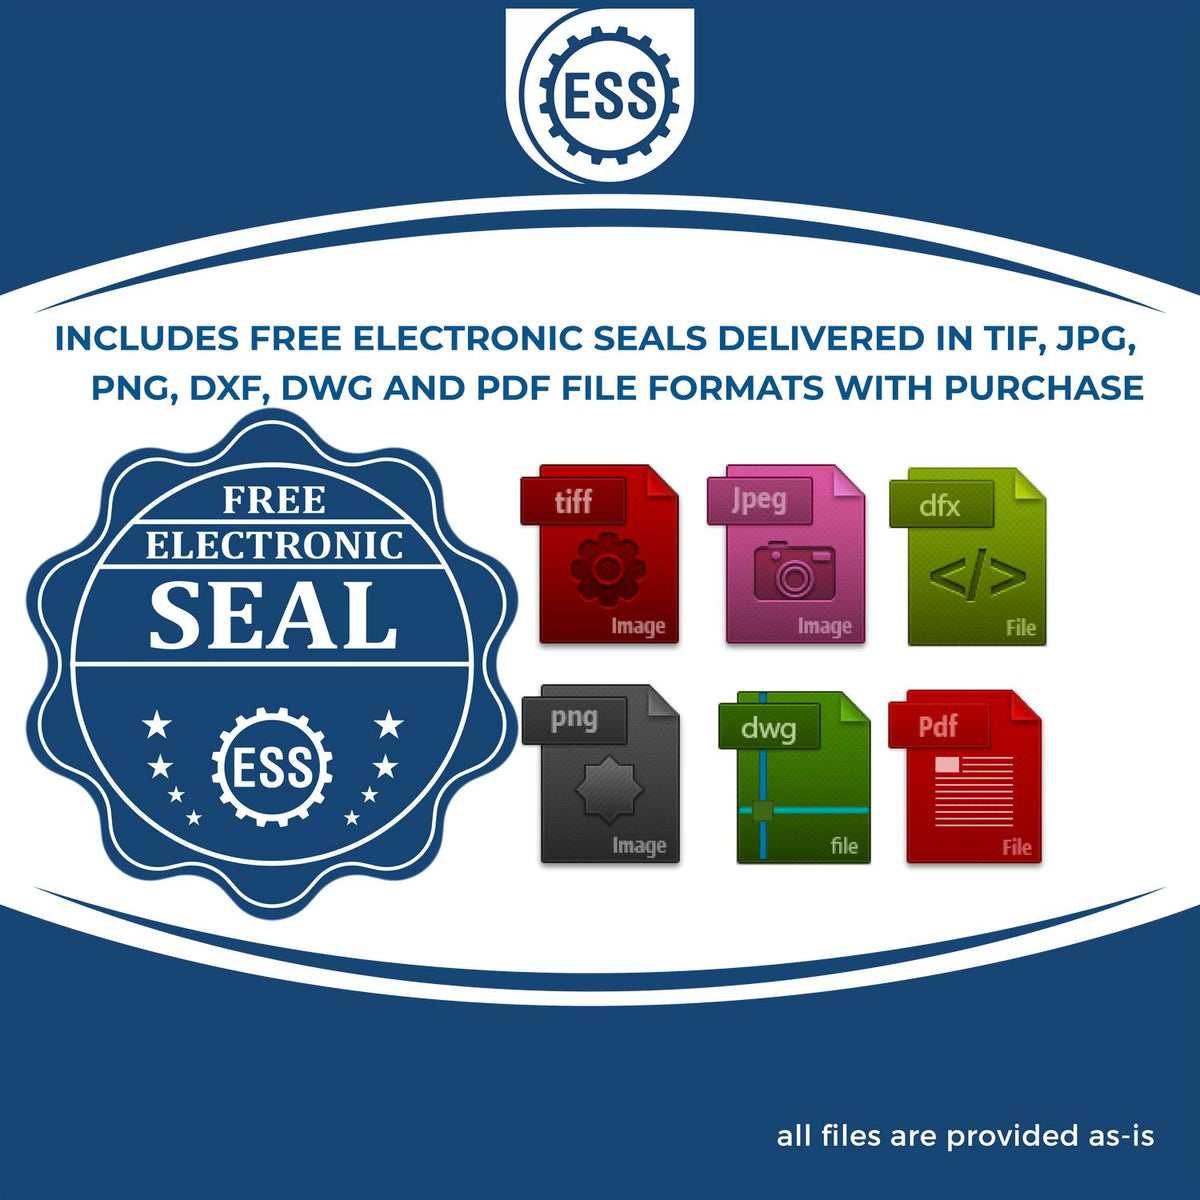 An infographic for the free electronic seal for the PSI Nevada Notary Stamp illustrating the different file type icons such as DXF, DWG, TIF, JPG and PNG.